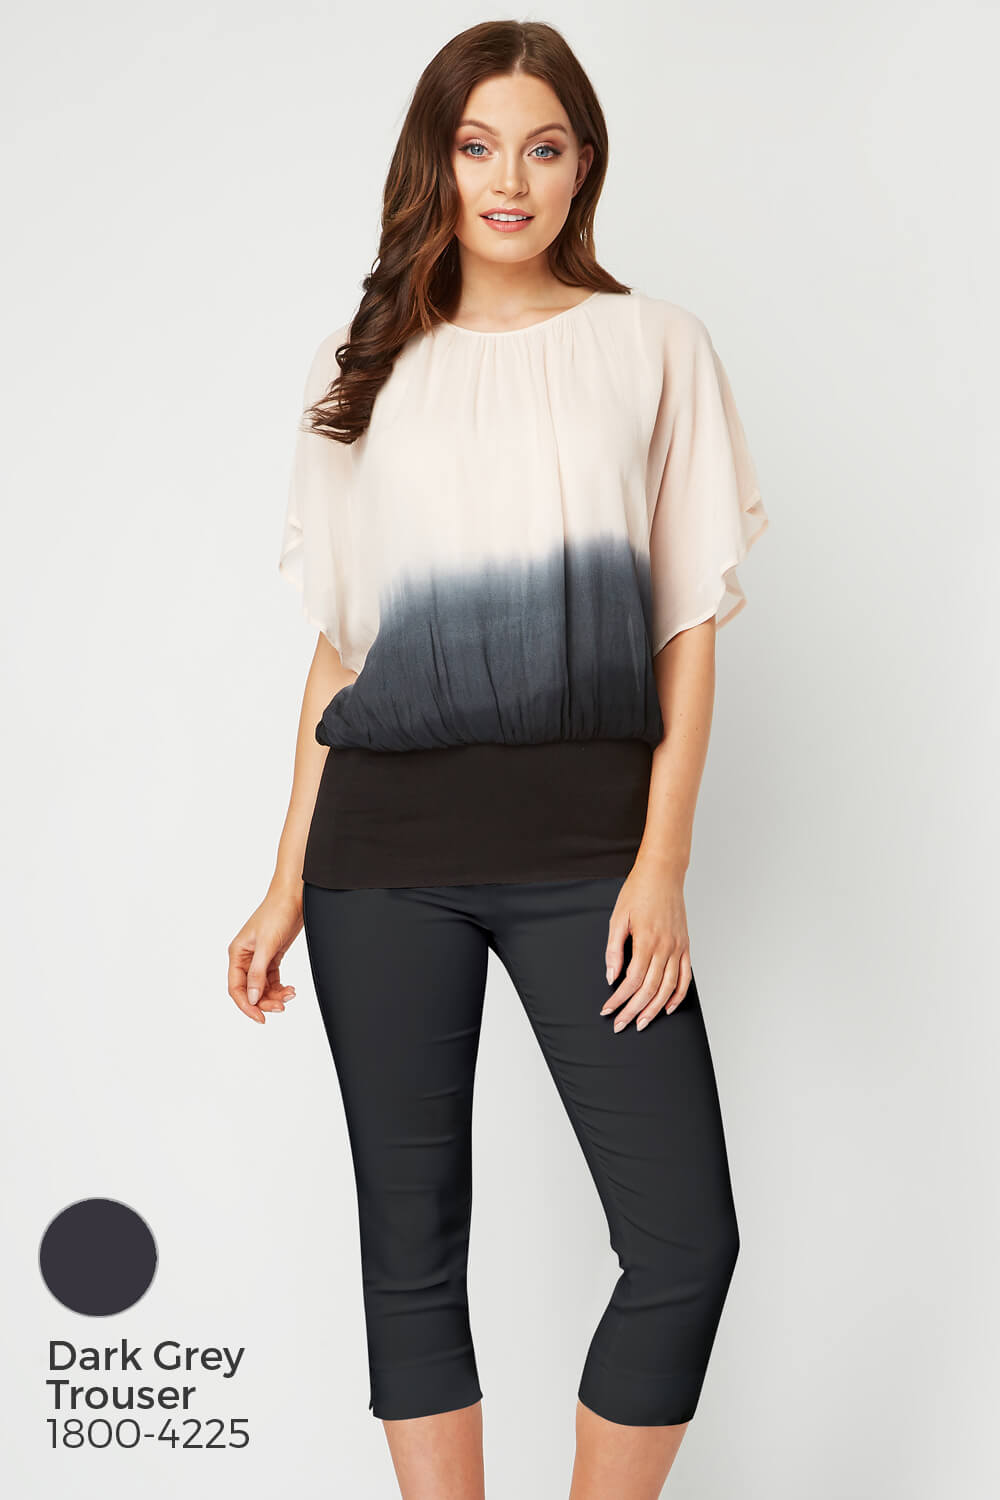 PINK Ombre Batwing Top, Image 8 of 8